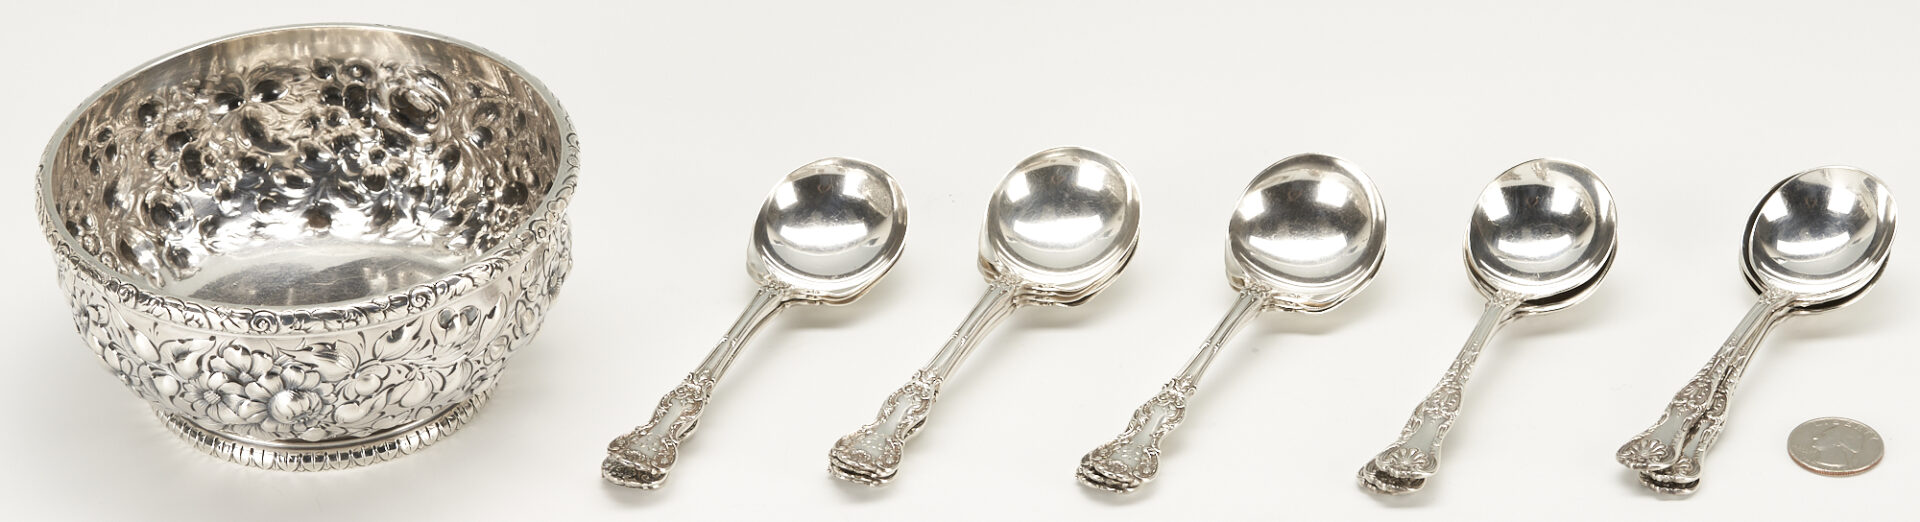 Lot 1096: 17 Sterling Silver Items, Gorham Soup Spoons & Howard Repousse Bowl